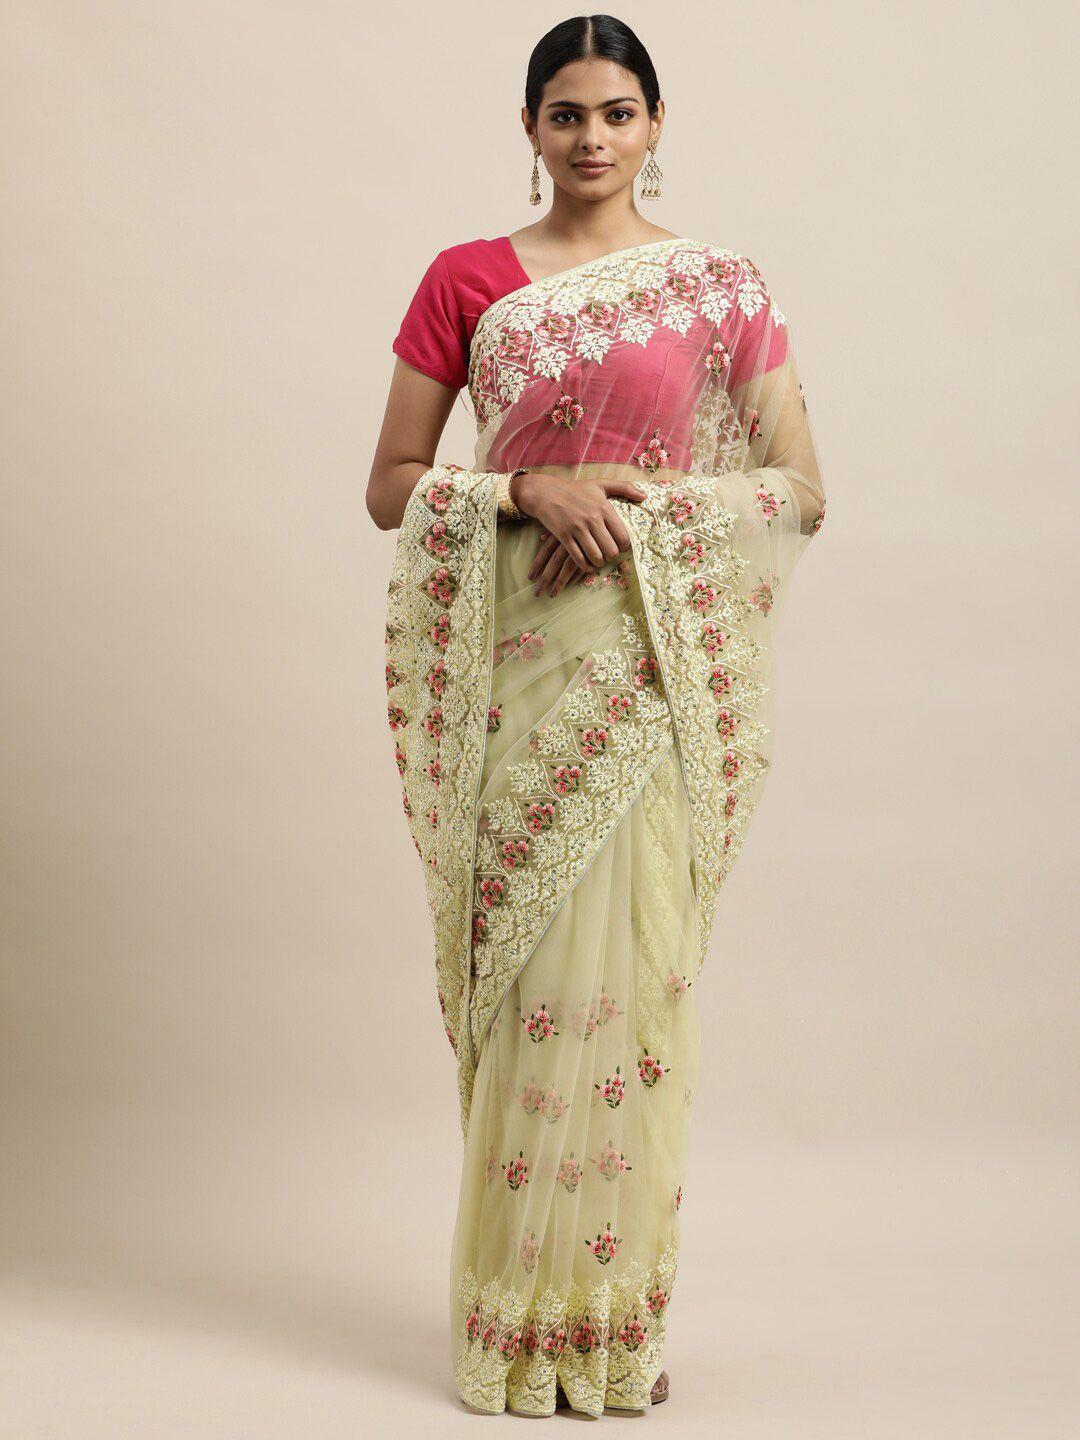 kasee floral beads and stones net saree